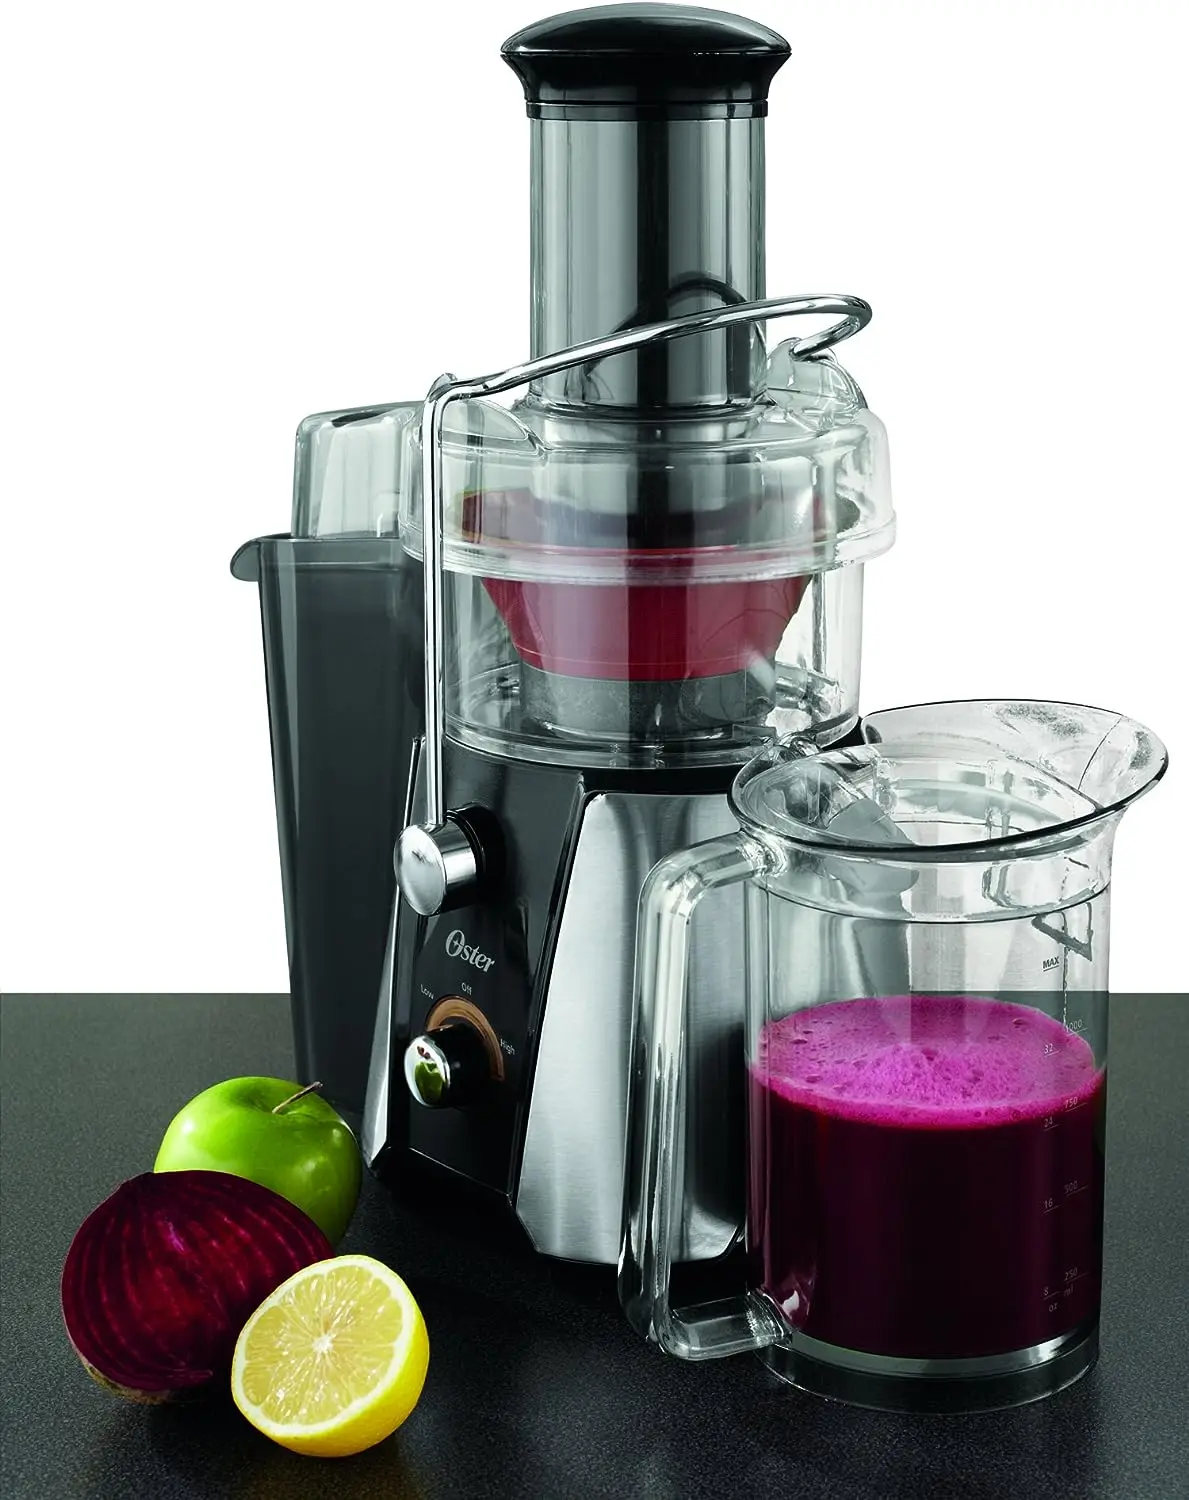 

2-Speed Easy Clean Juice Extractor with Extra-Wide Feed Chute, FPSTJE9010-000, 900W, Black/Silver